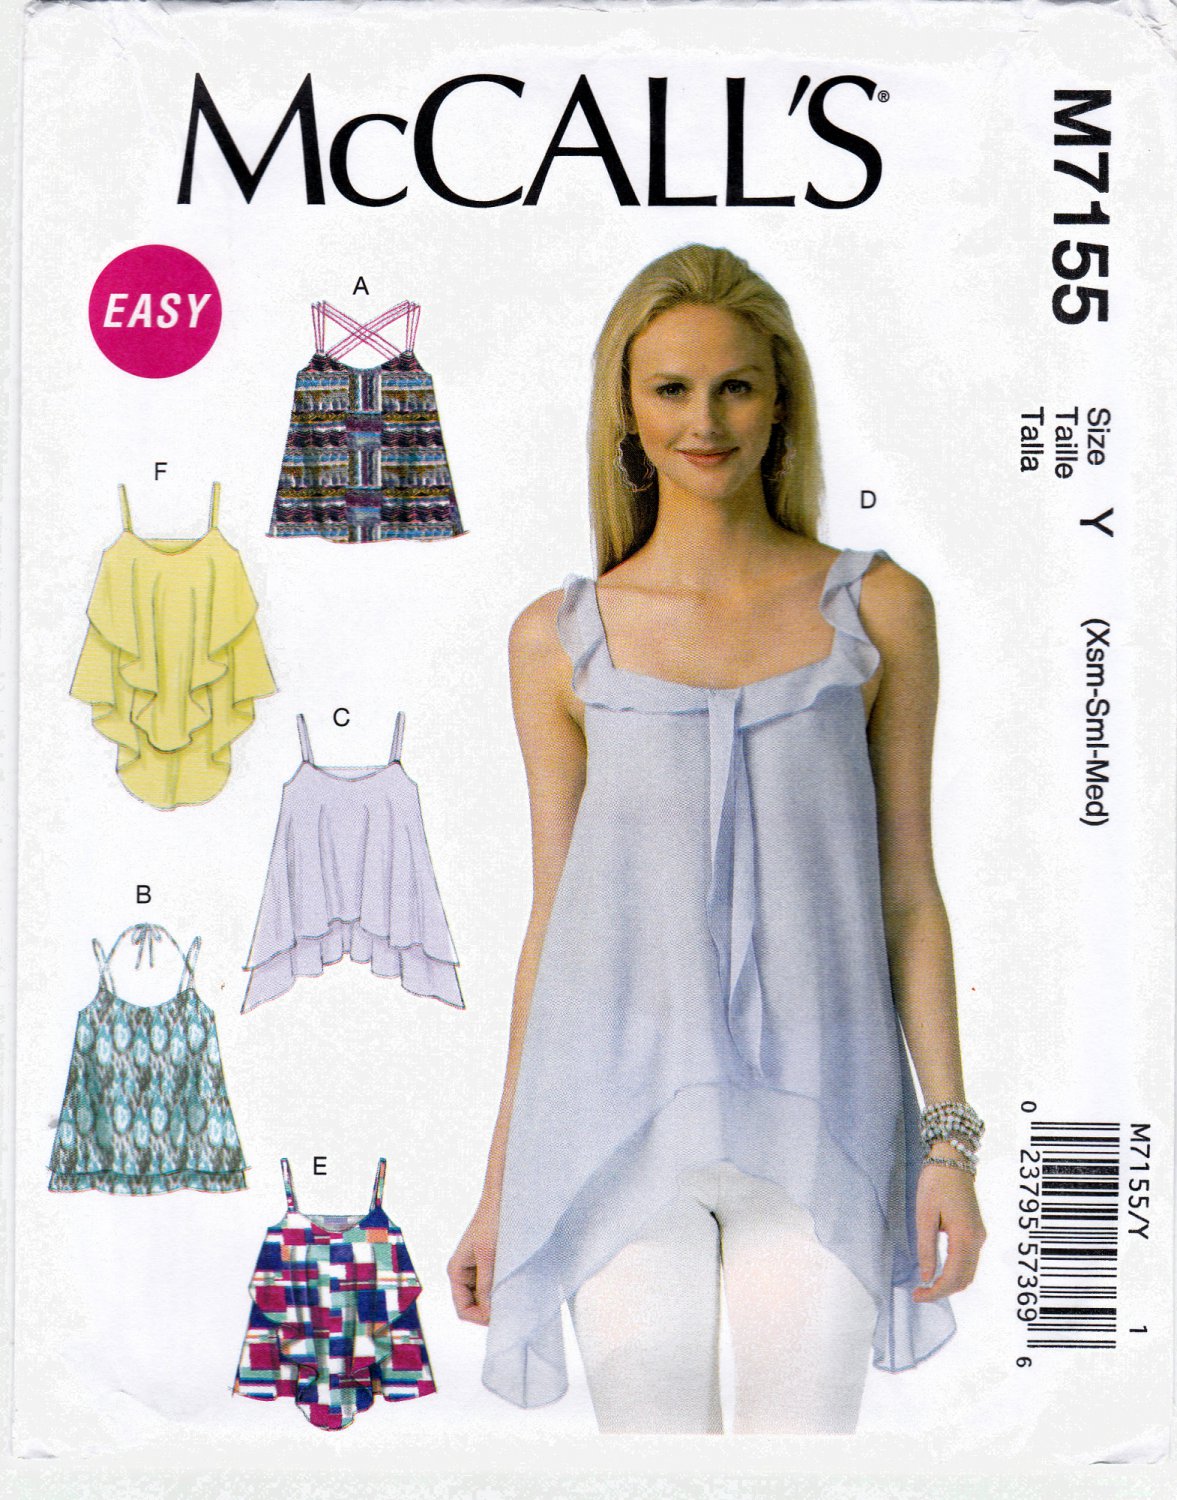 McCall's M7155 7155 Misses Pullover Tops with Shoulder Straps Easy Sewing Pattern Sizes Xsm-Sml-Med